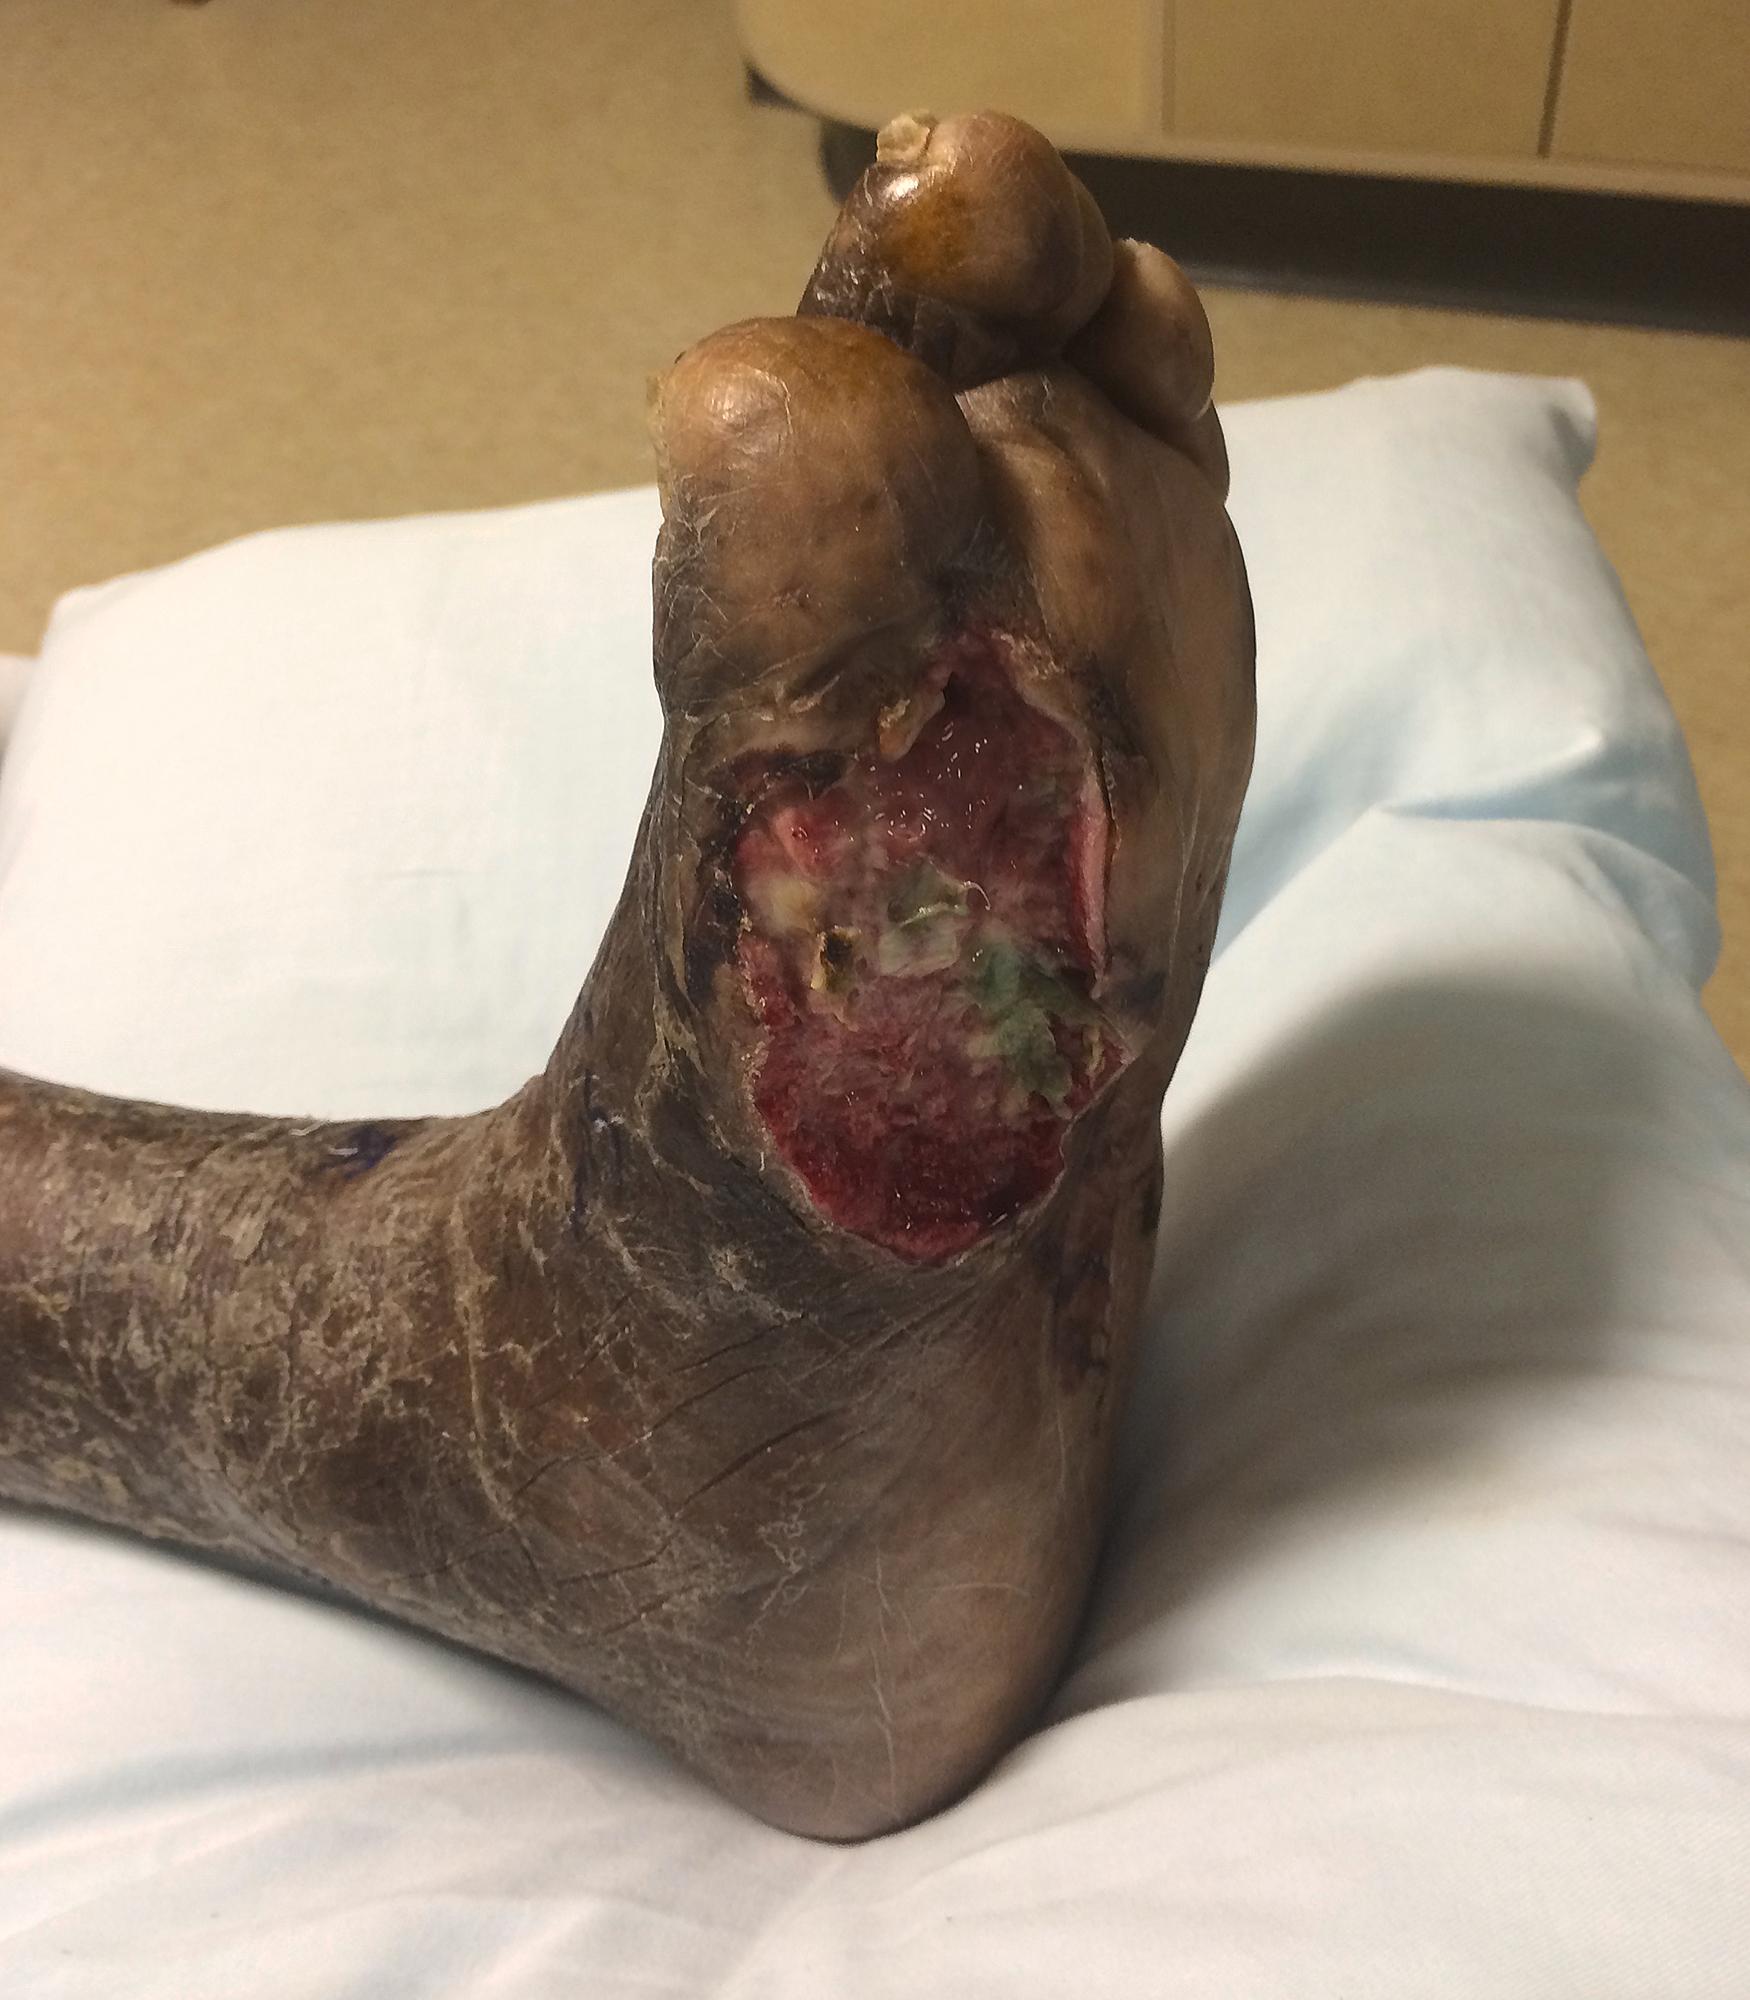 Figure 116.3, Diabetic foot ulceration with dry, brittle skin in an area of pressure.